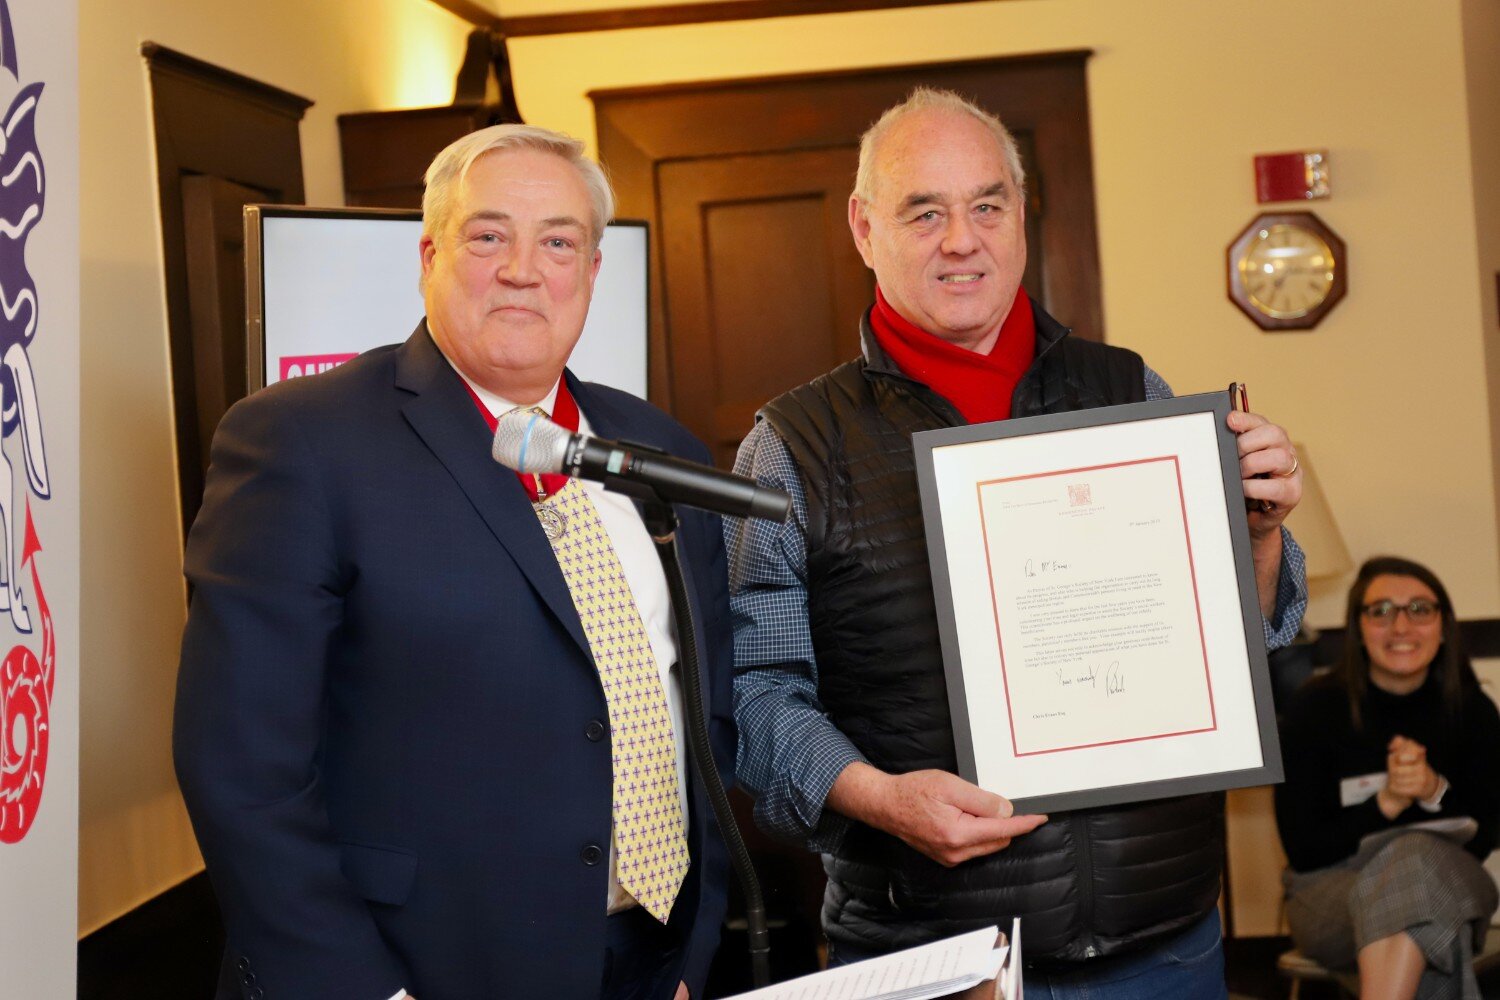  Philip Warner OBE presents a commendation to dedicated member and volunteer, Chris Evans (R) in recognition of his invaluable assistance to the Society’s social workers. Without a doubt Chris’ work has prevented many of our beneficiaries from becomi